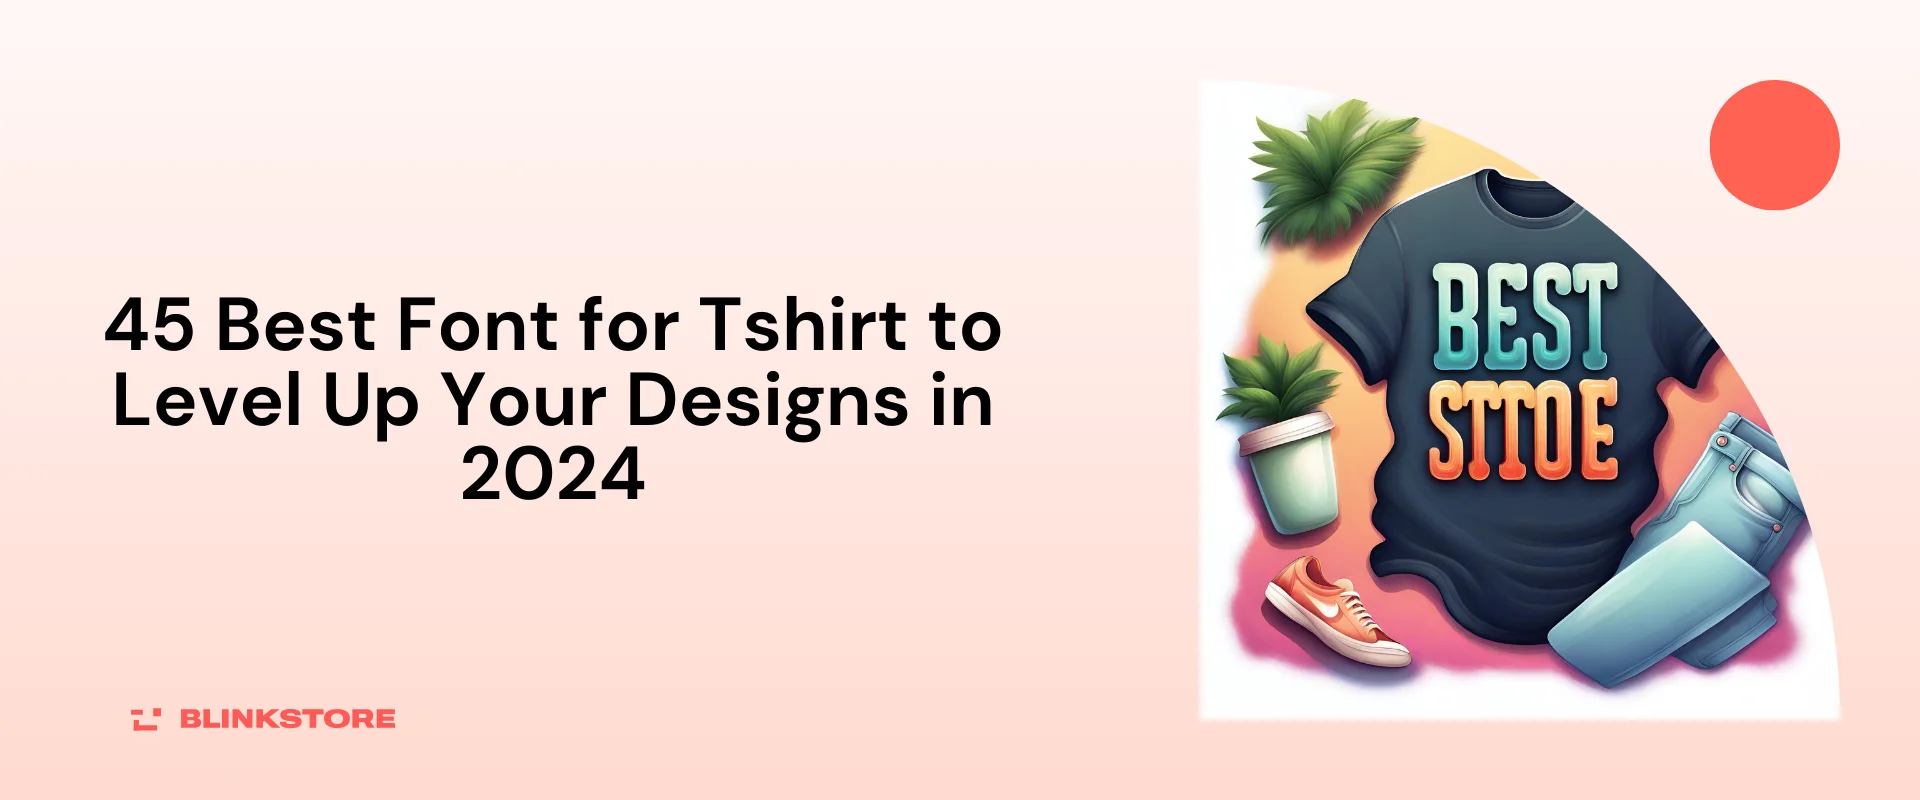 45 Best Font for Tshirt to Level Up Your Designs in 2024